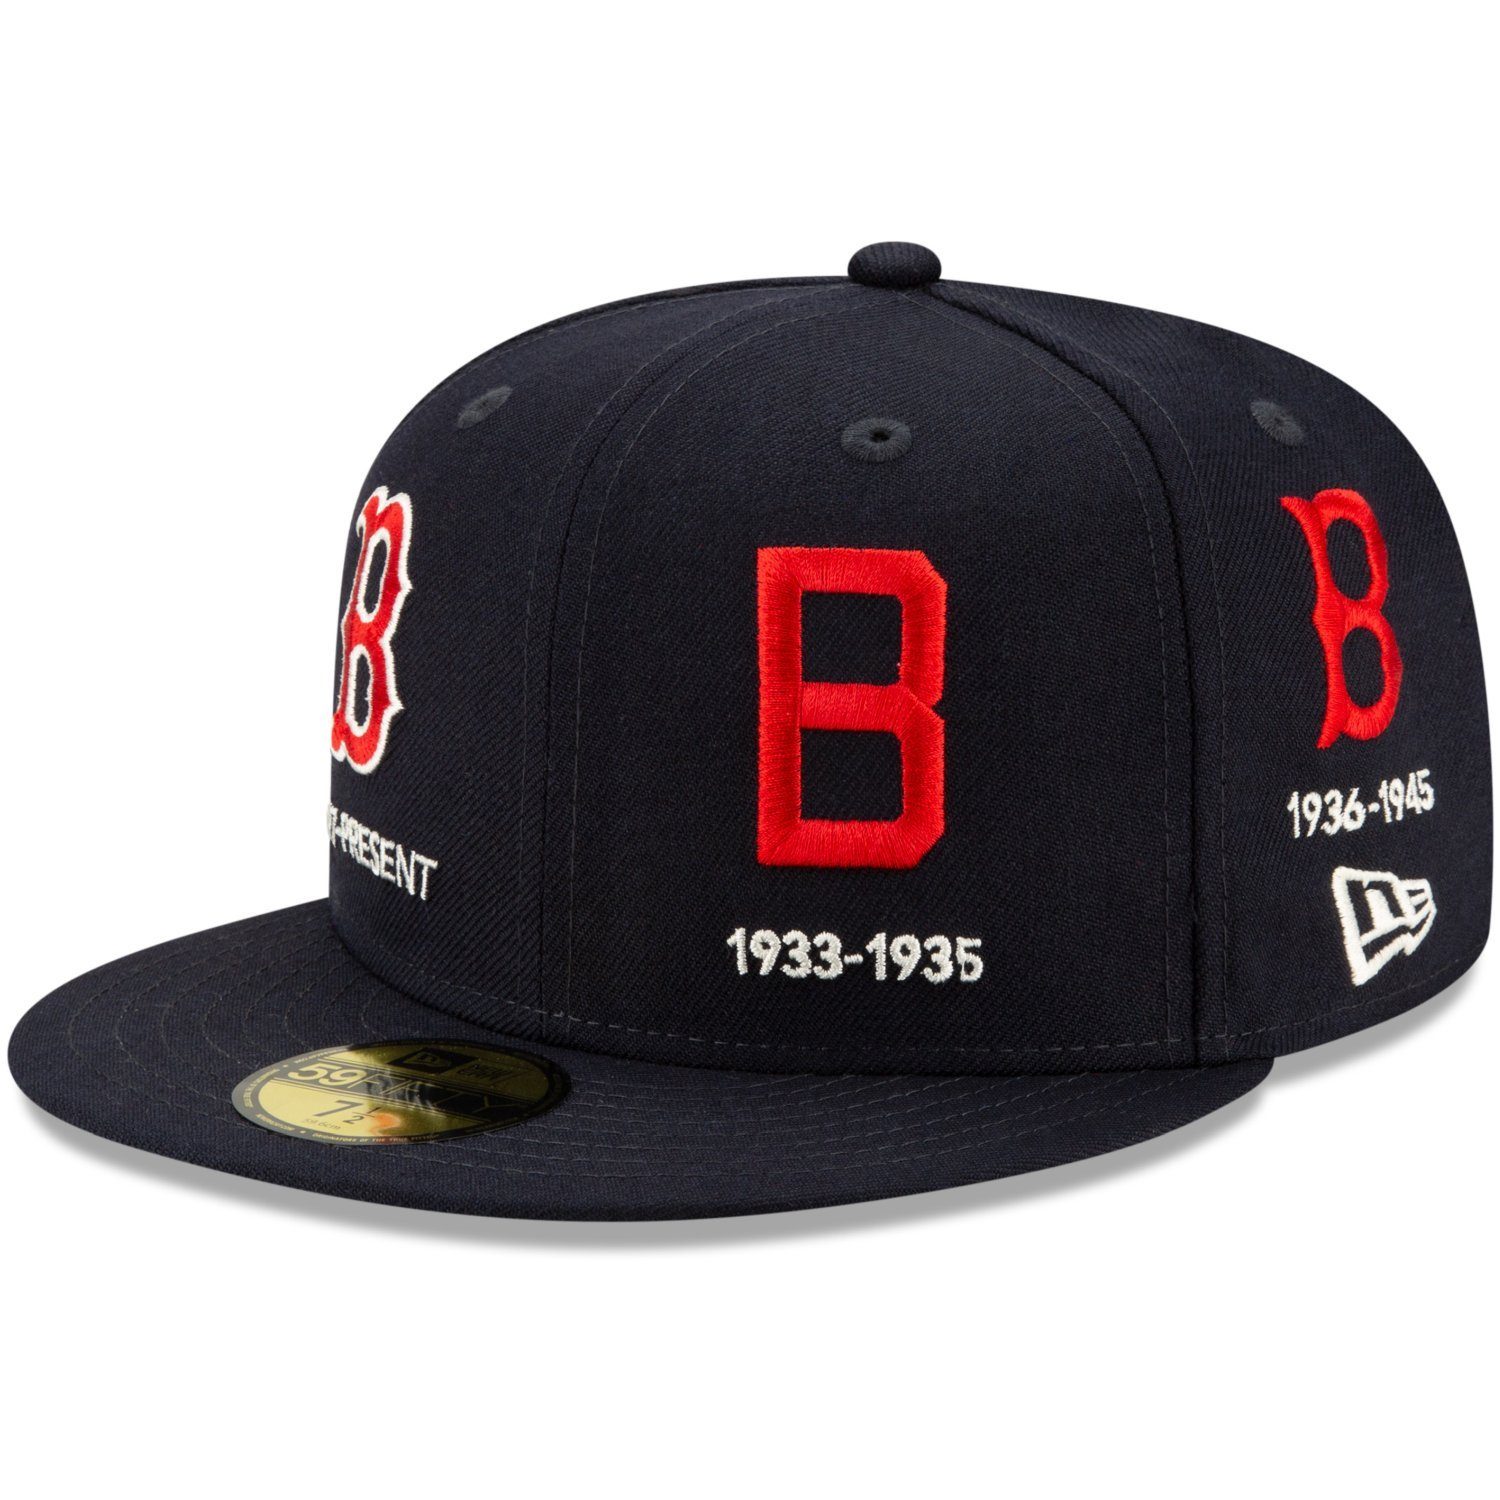 New Era Fitted Cap 59Fifty COOPERSTOWN Boston Red Sox